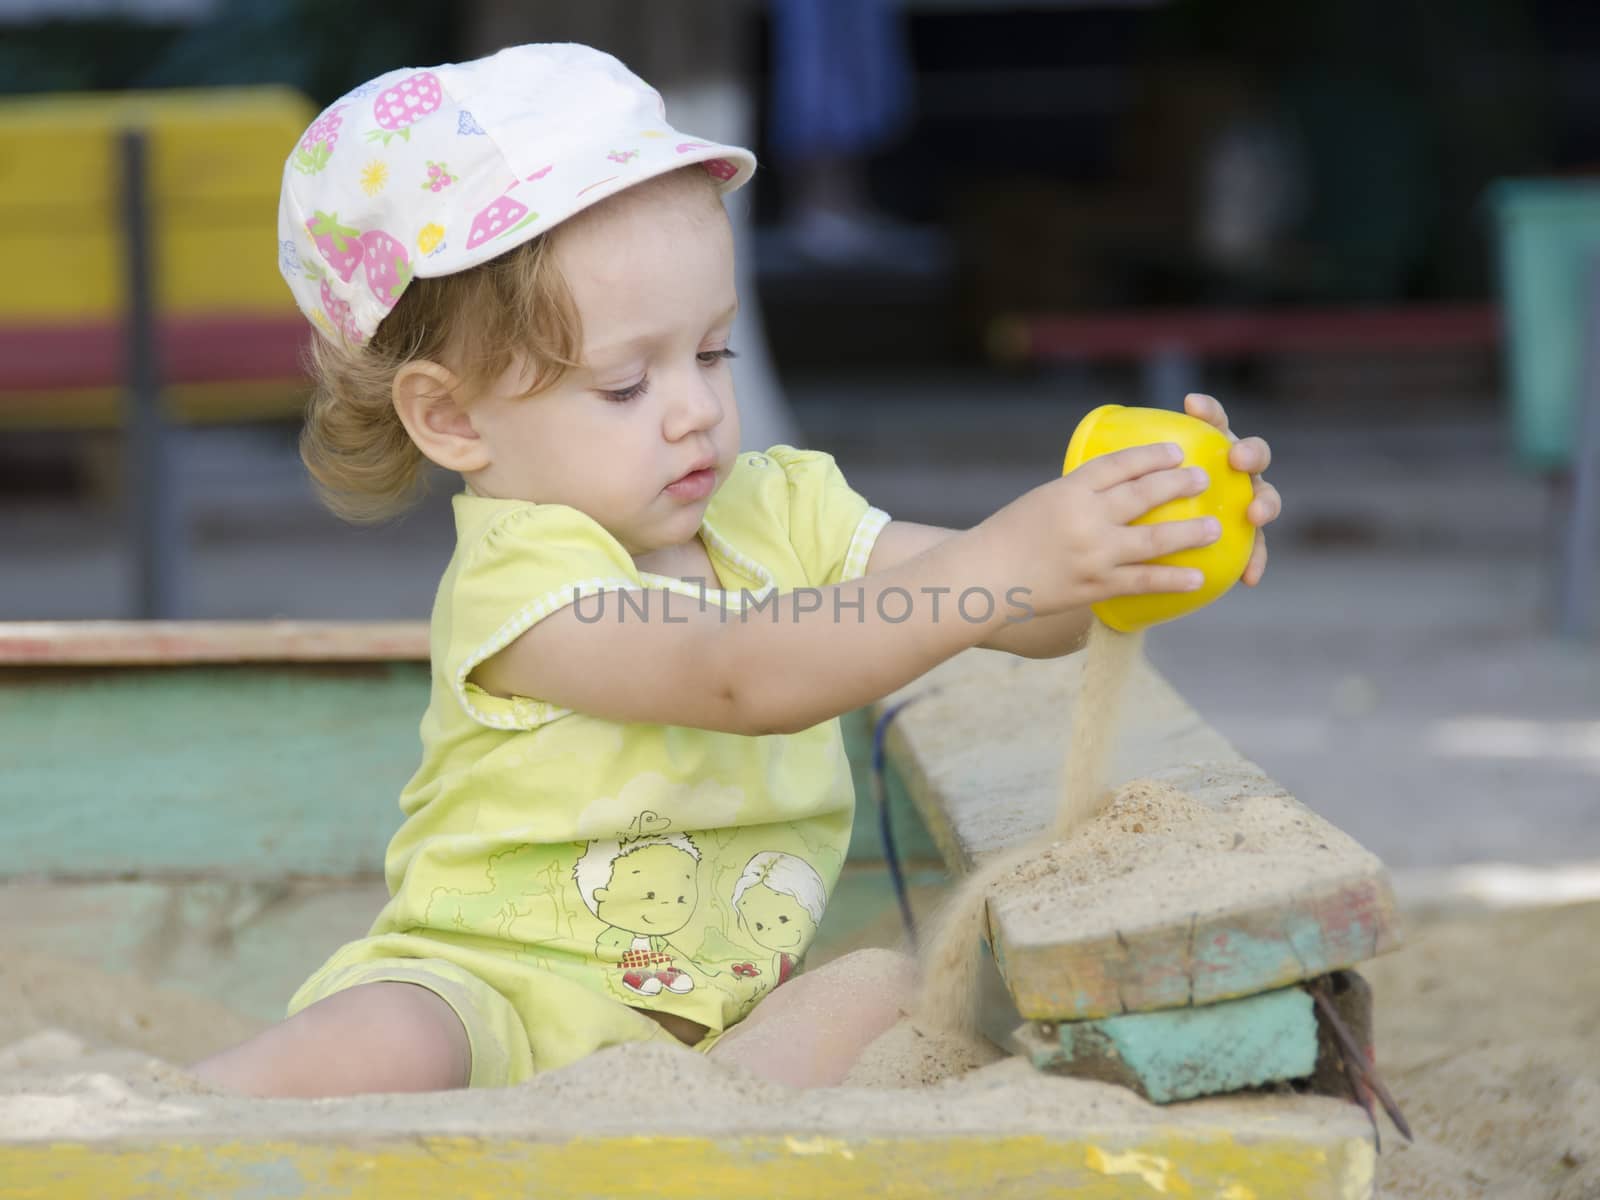  Little girl playing in the sandbox by Madhourse